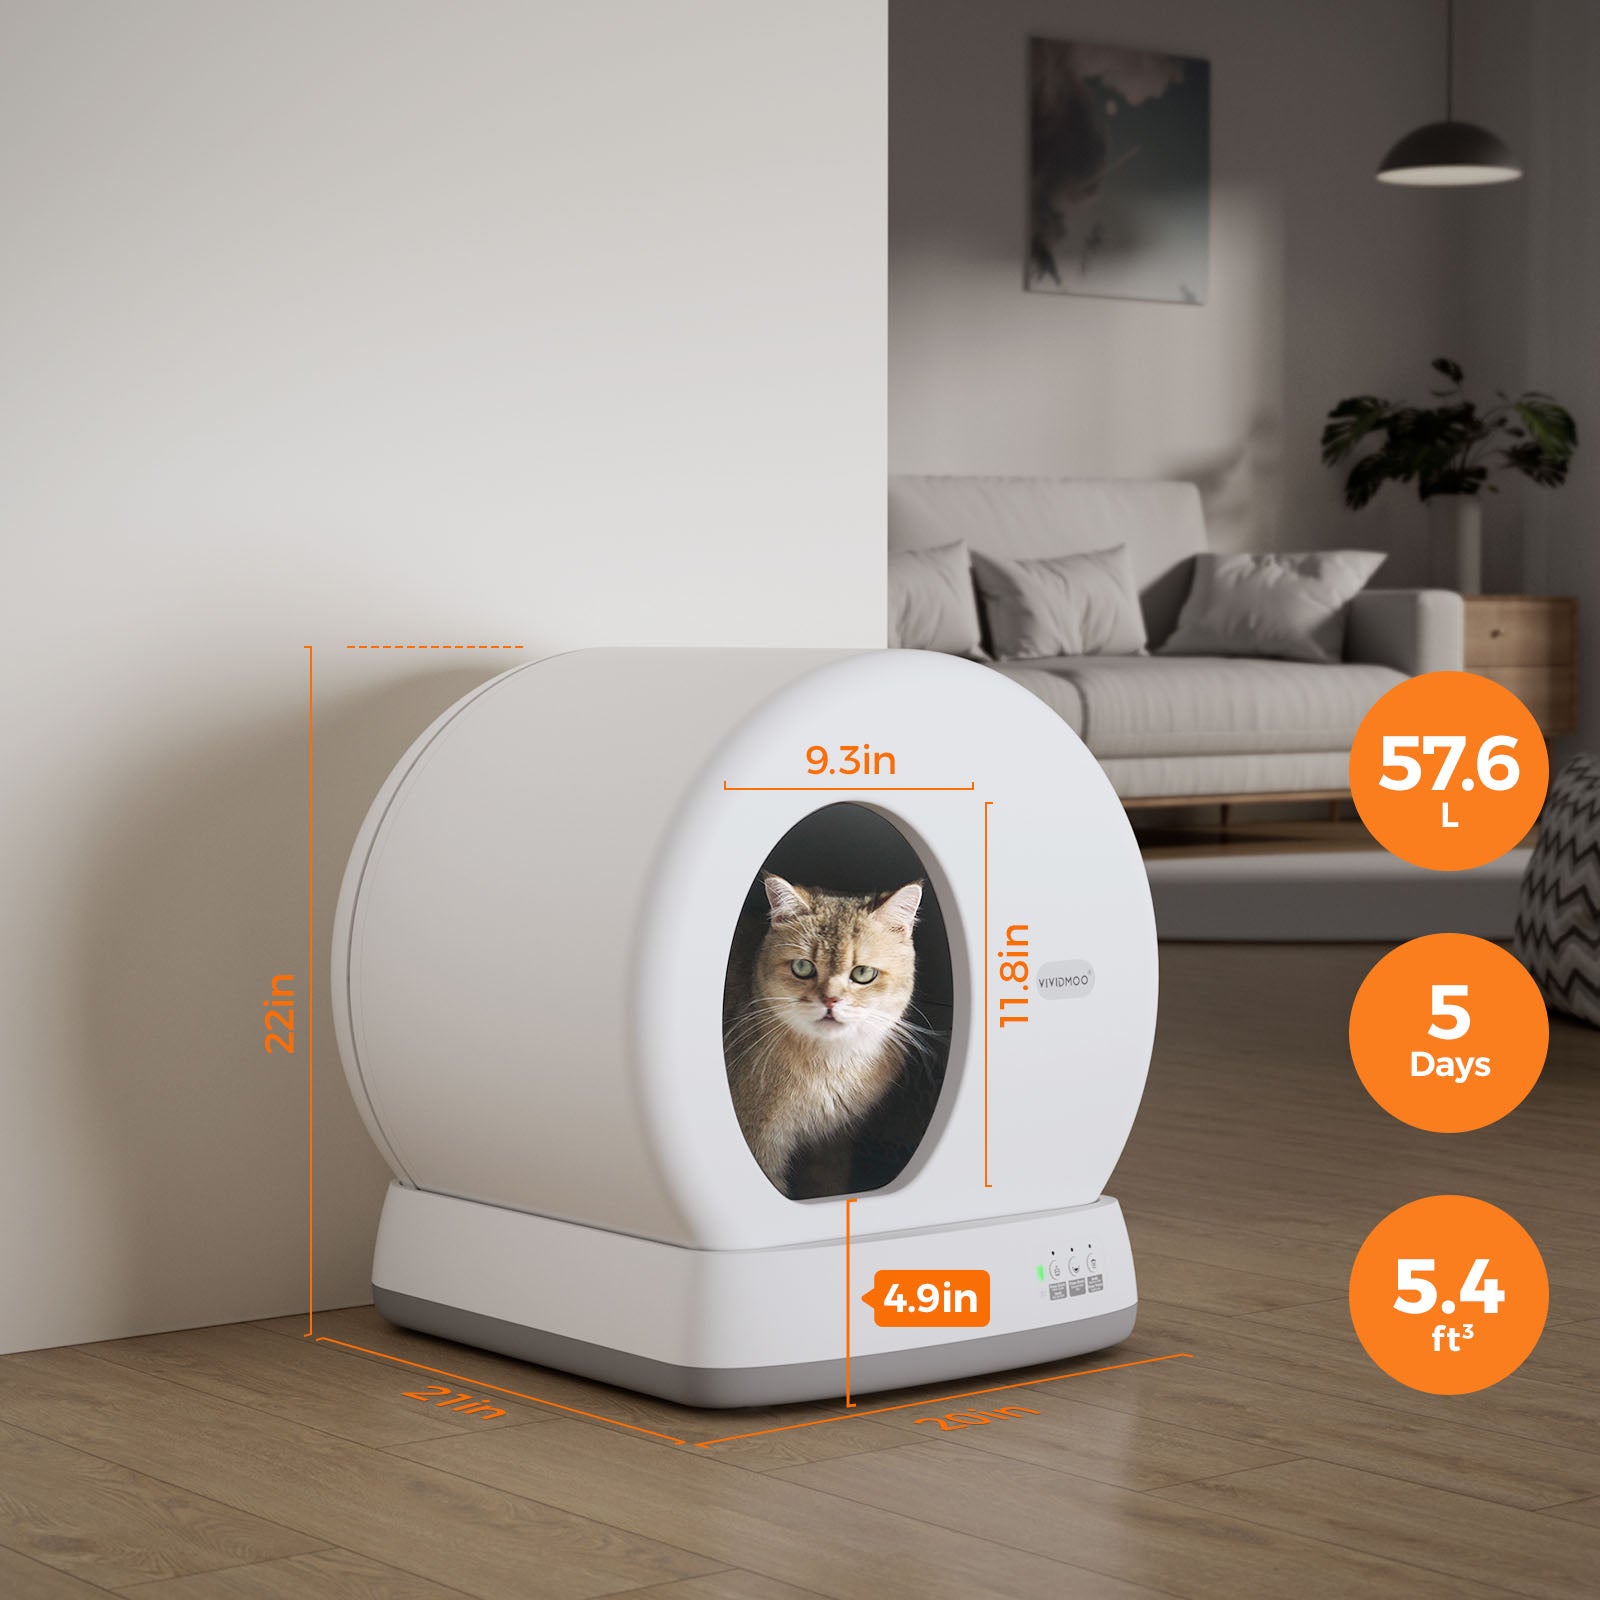 Auto Self-cleaning Cat Litter Box